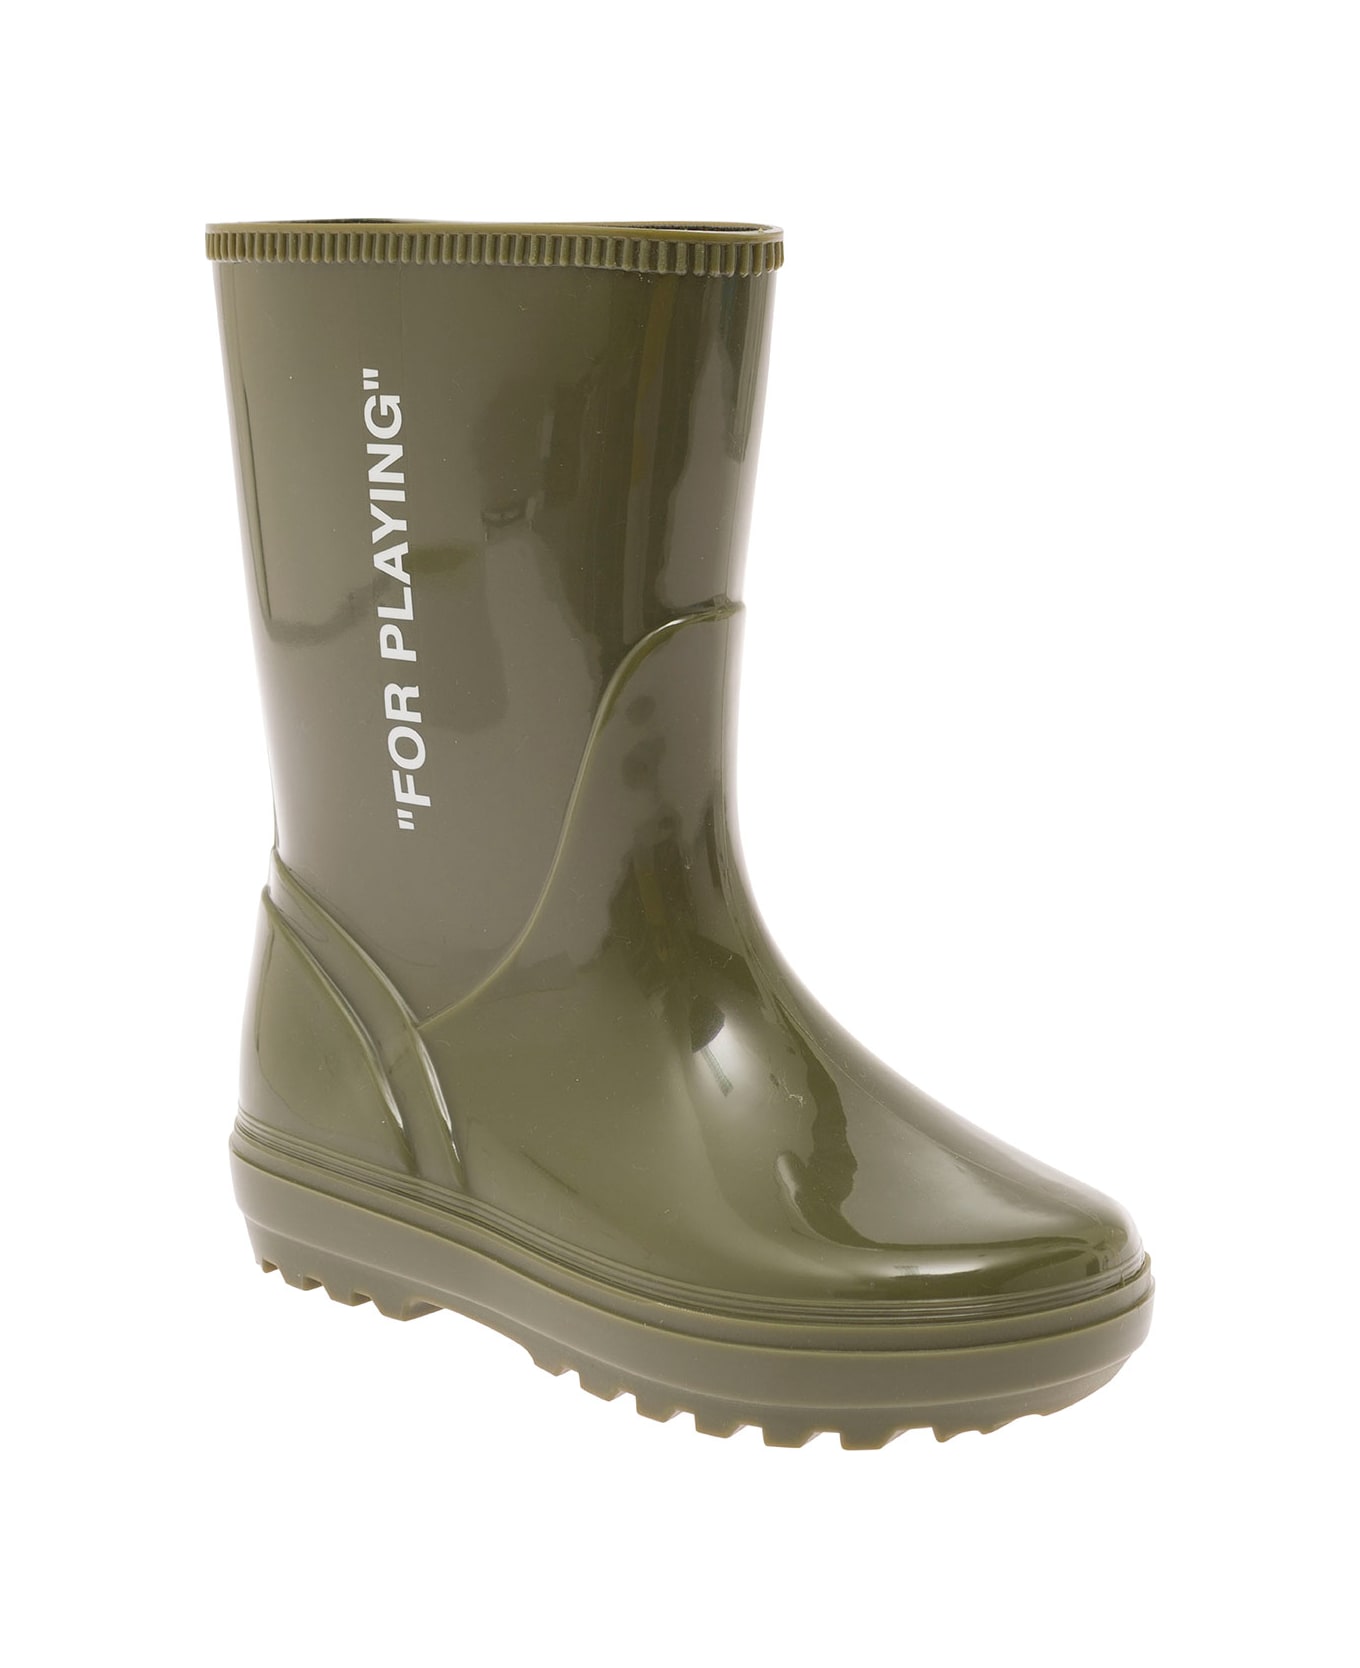 Off-White For Playing' Rubberboot - White